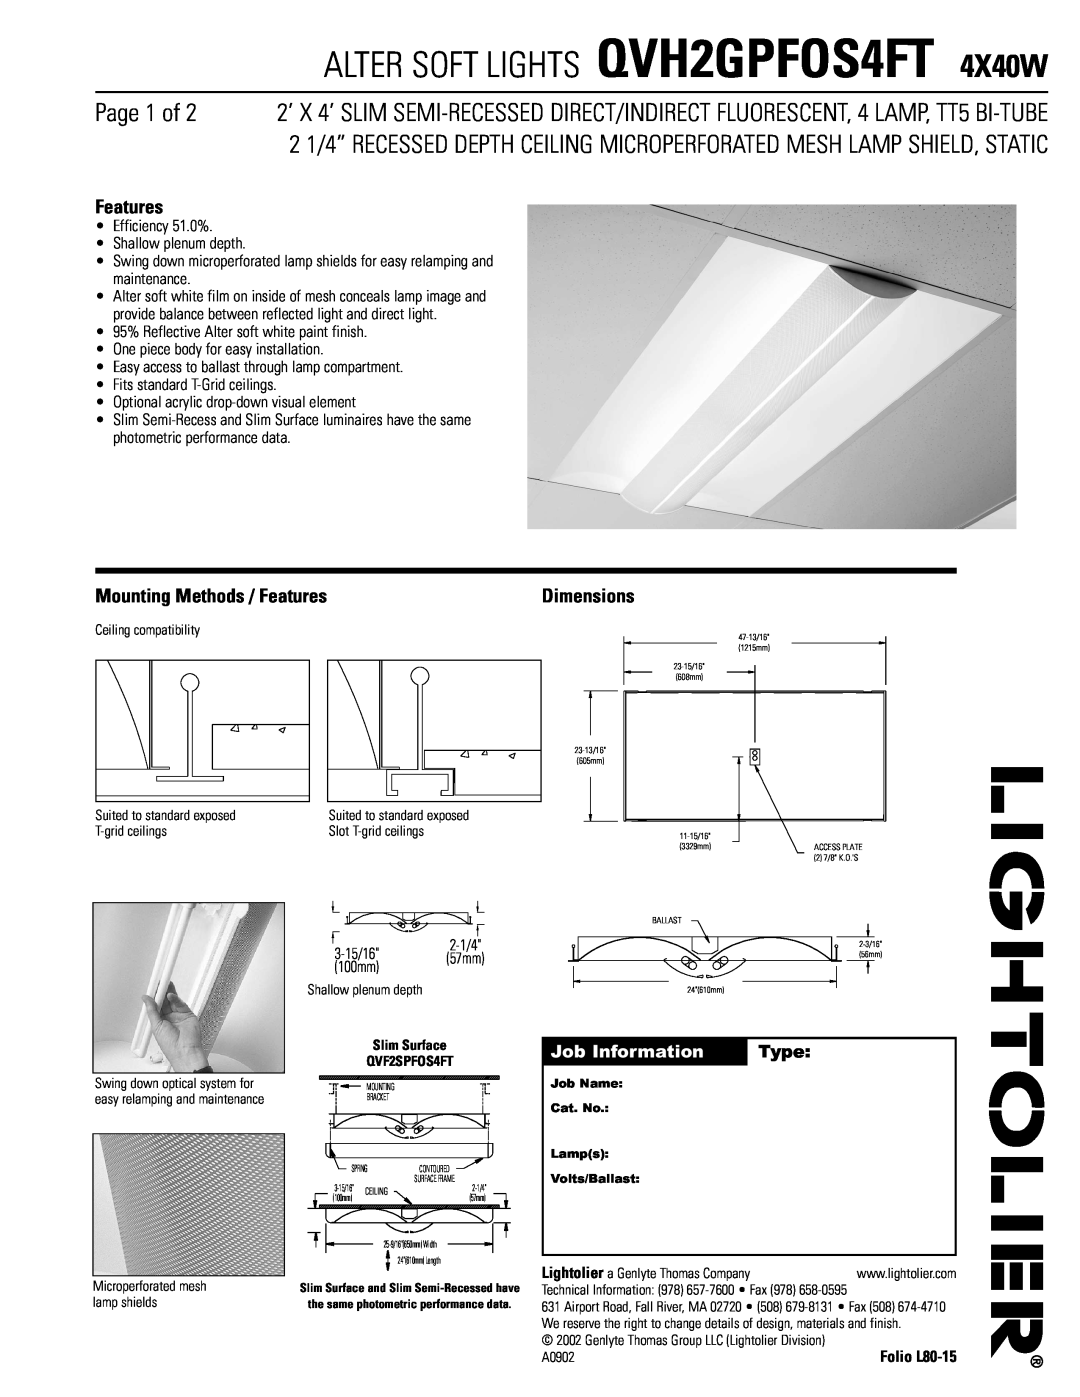 Lightolier dimensions Mounting Methods / Features, ALTER SOFT LIGHTS QVH2GPFOS4FT 4X40W, Job Information, Type 